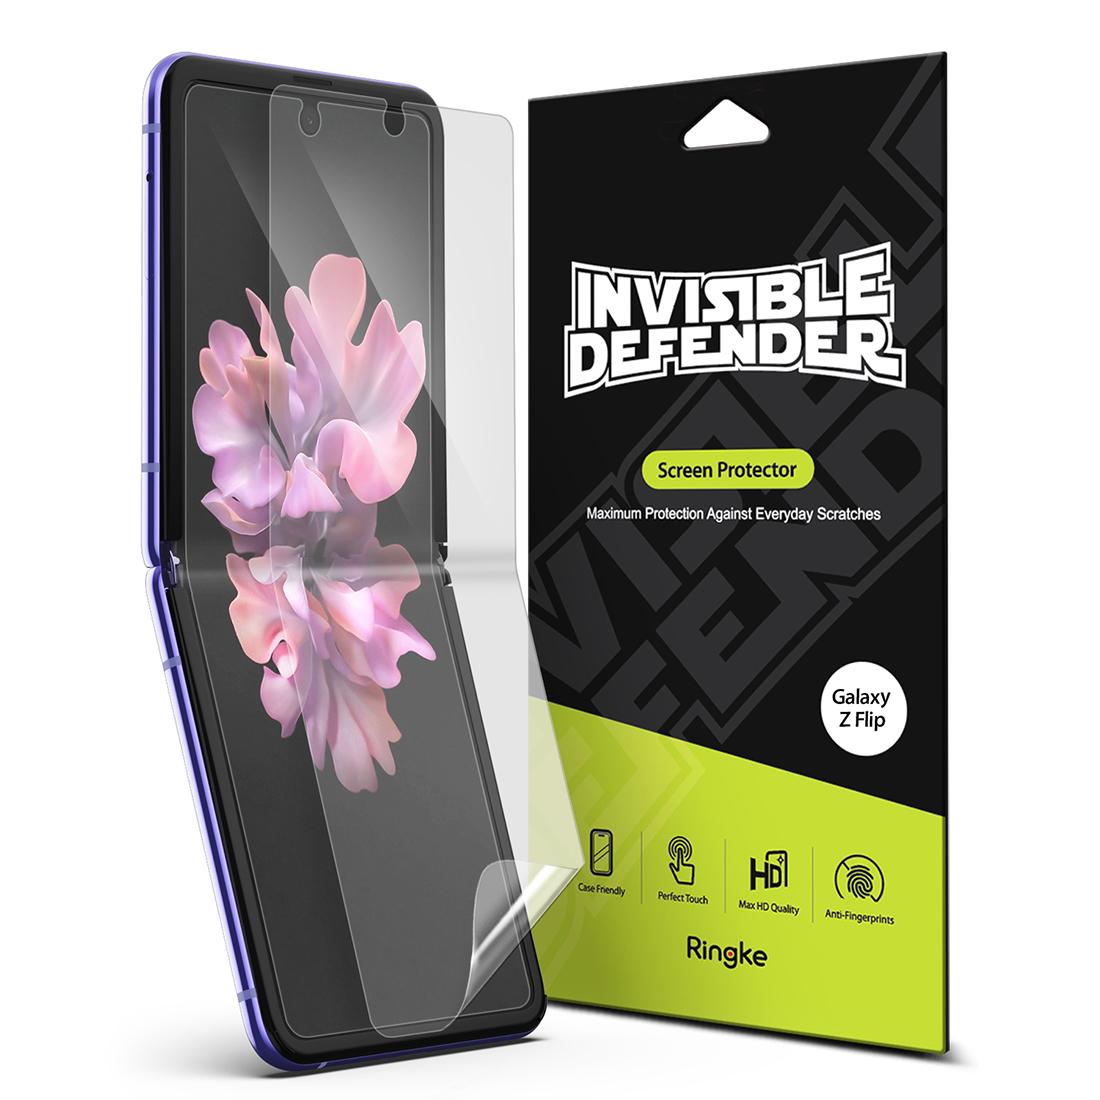 Ringke Invisible Defender Full Coverage (2 Pack) Screen Guard for Samsung Galaxy Z Flip (2020) Screen Protector - Clear